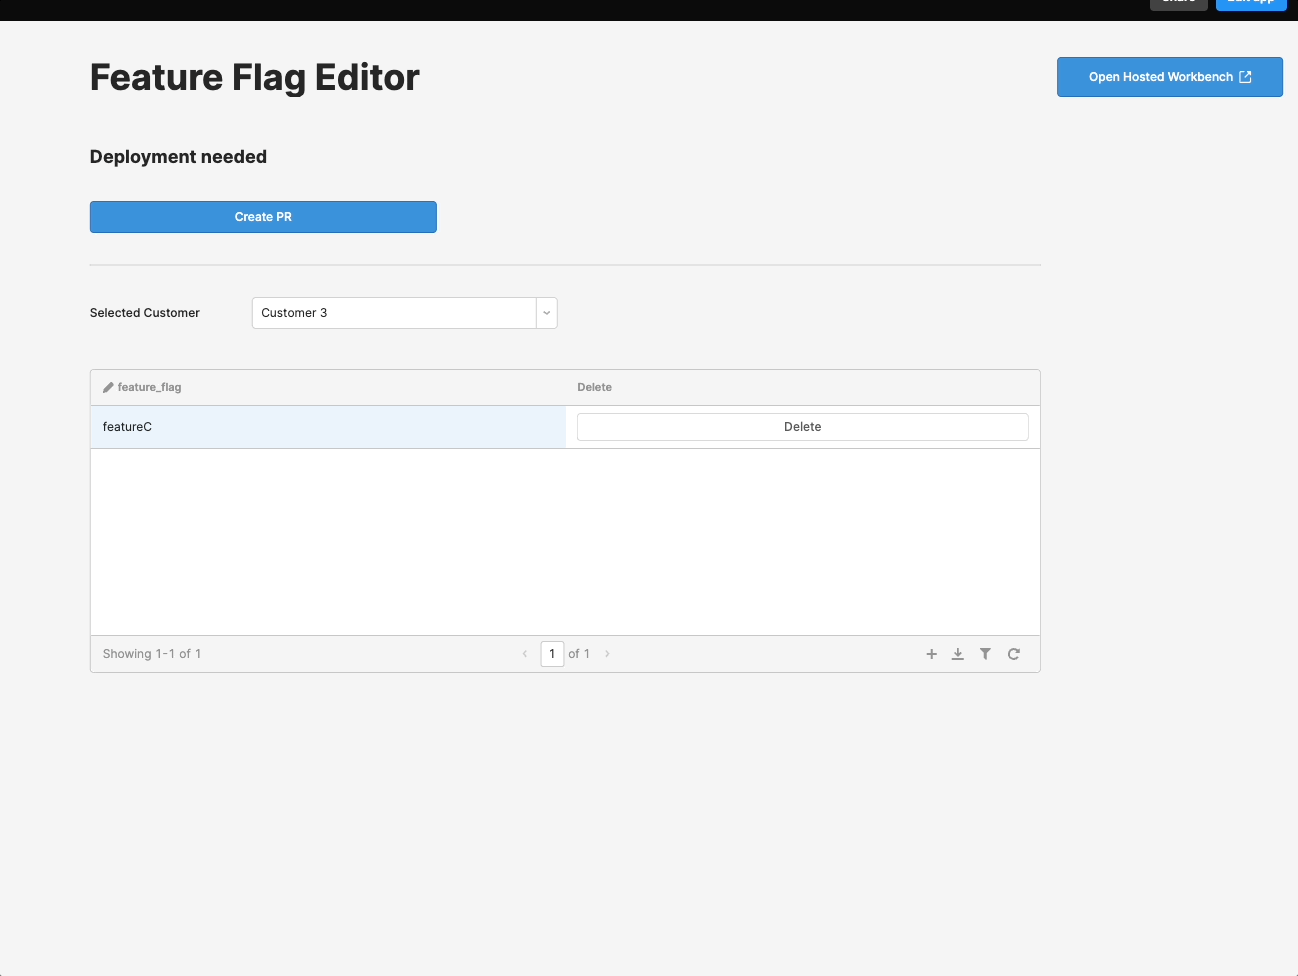 delete the feature flag